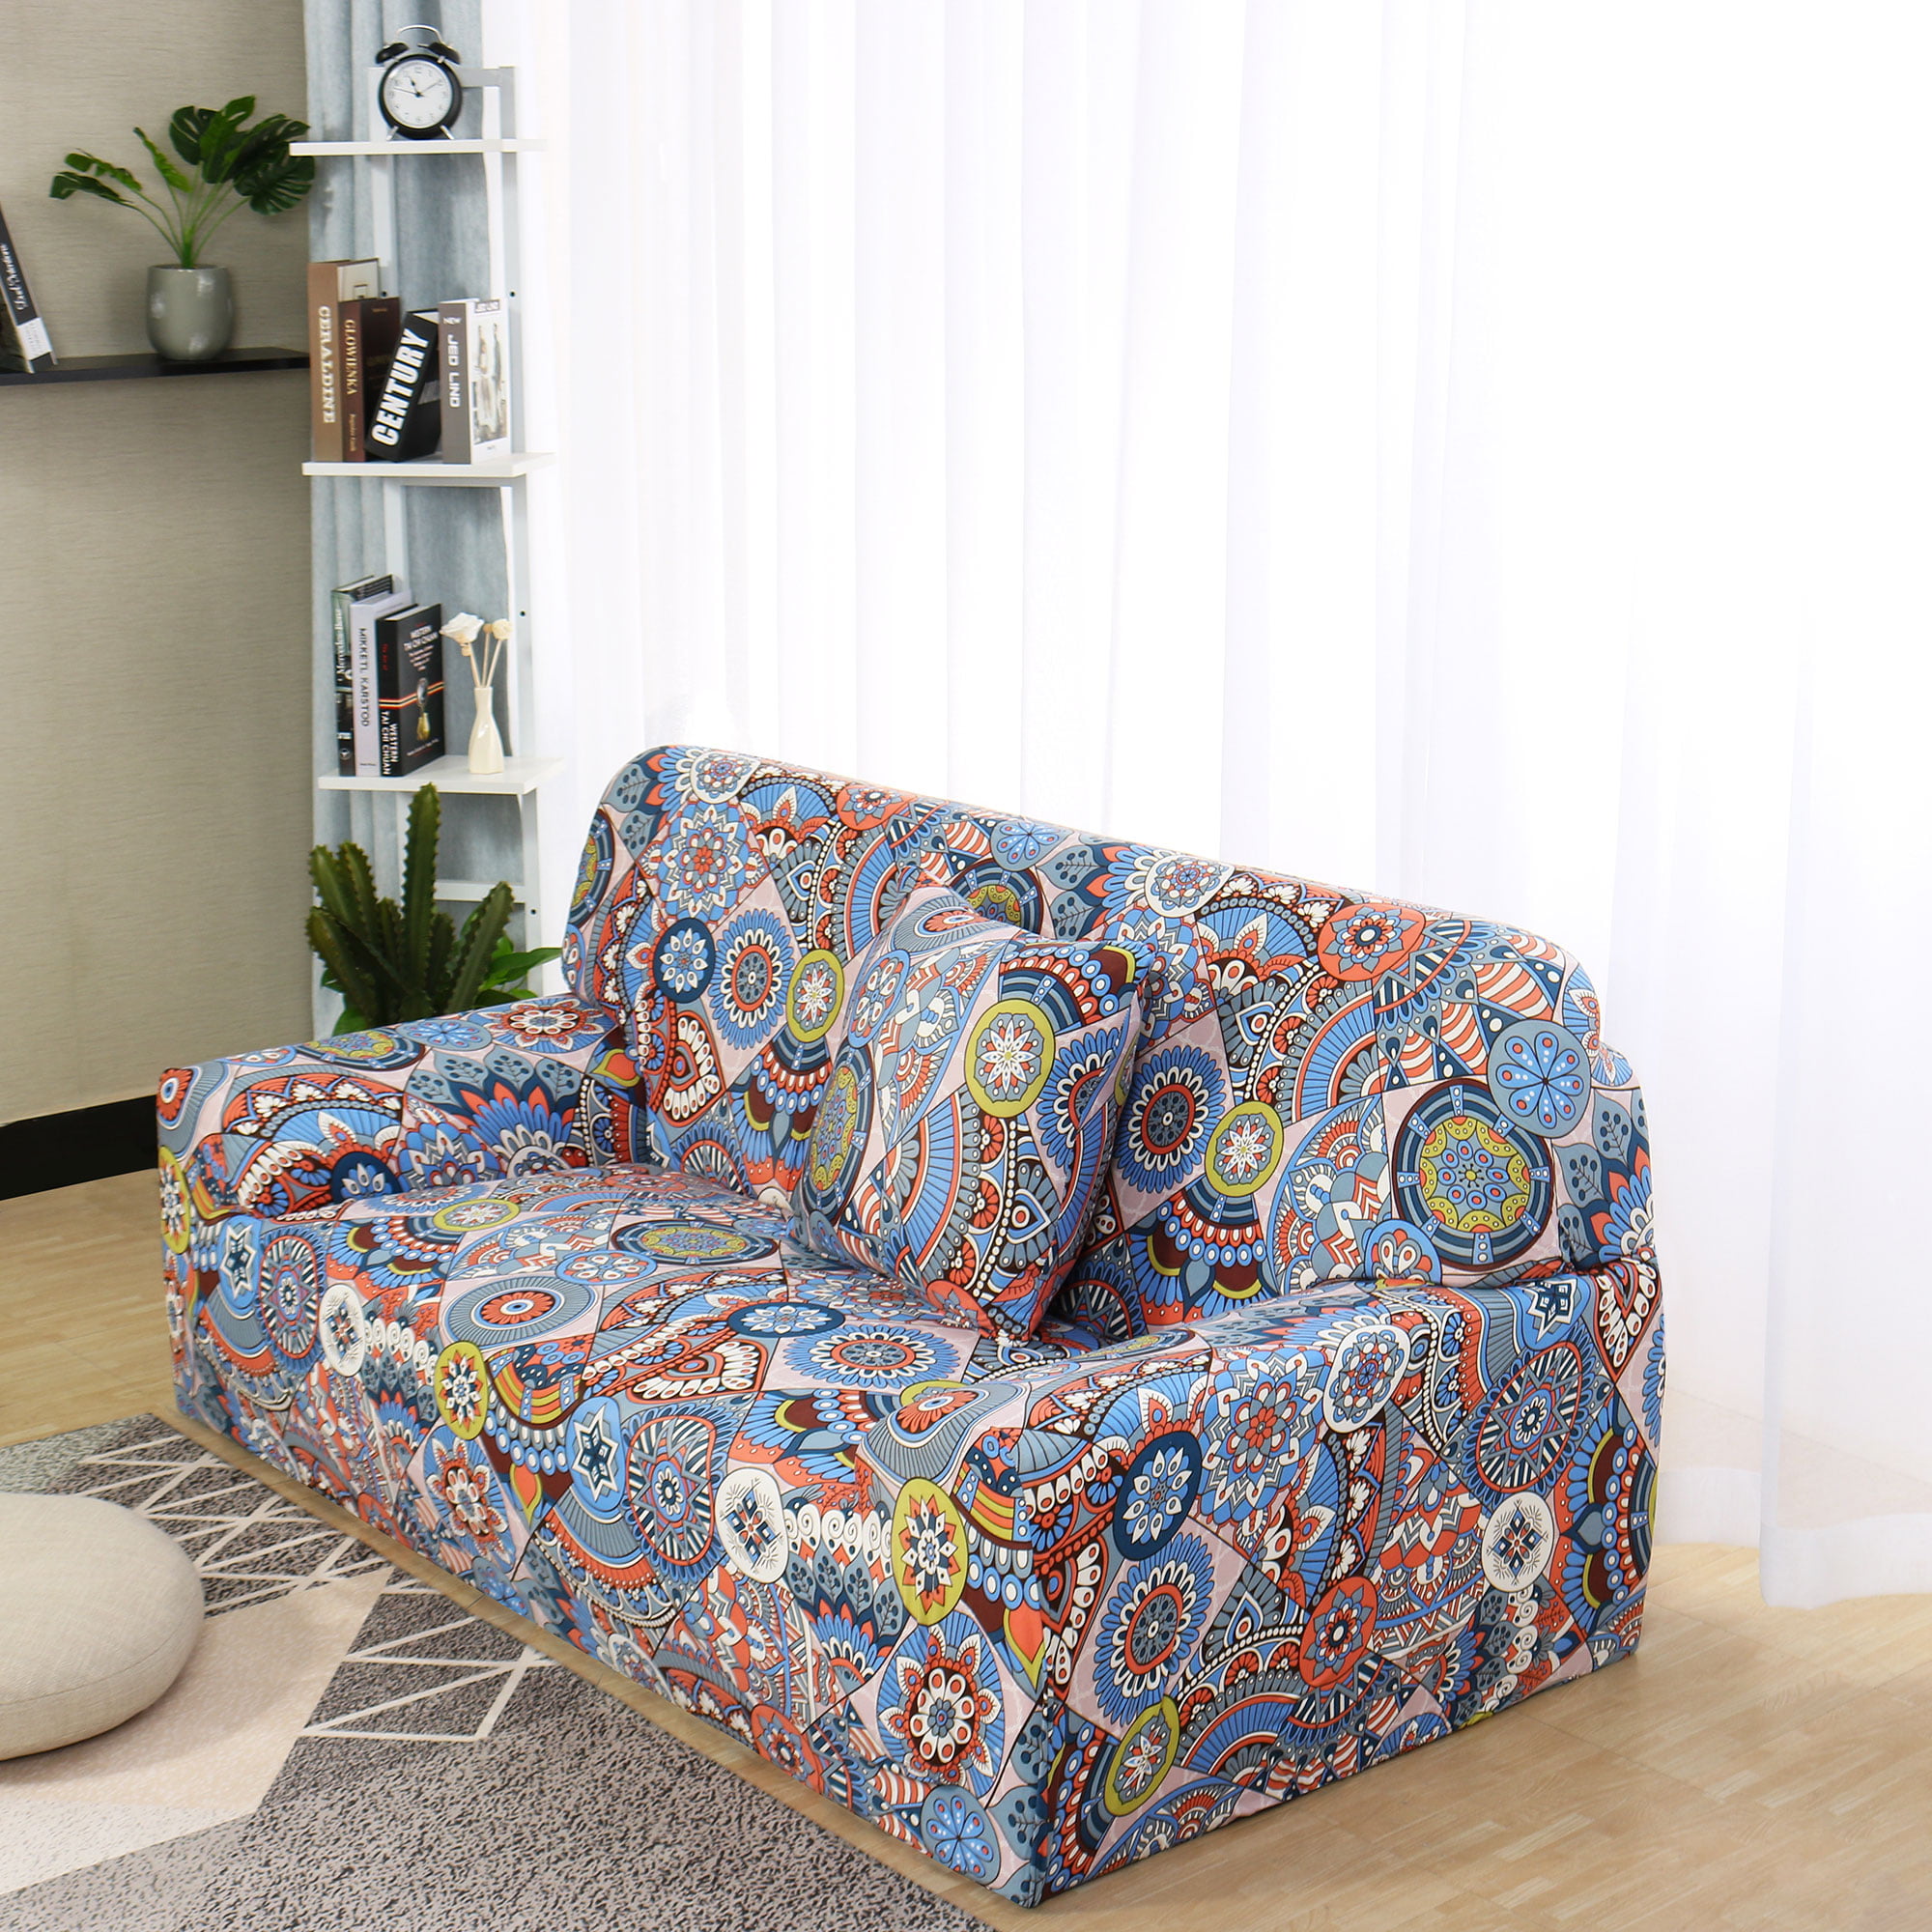 Details about   1/2/3/4 Seat Sofa Cover Spandex Stretch Floral Printed Couch Slipcover 